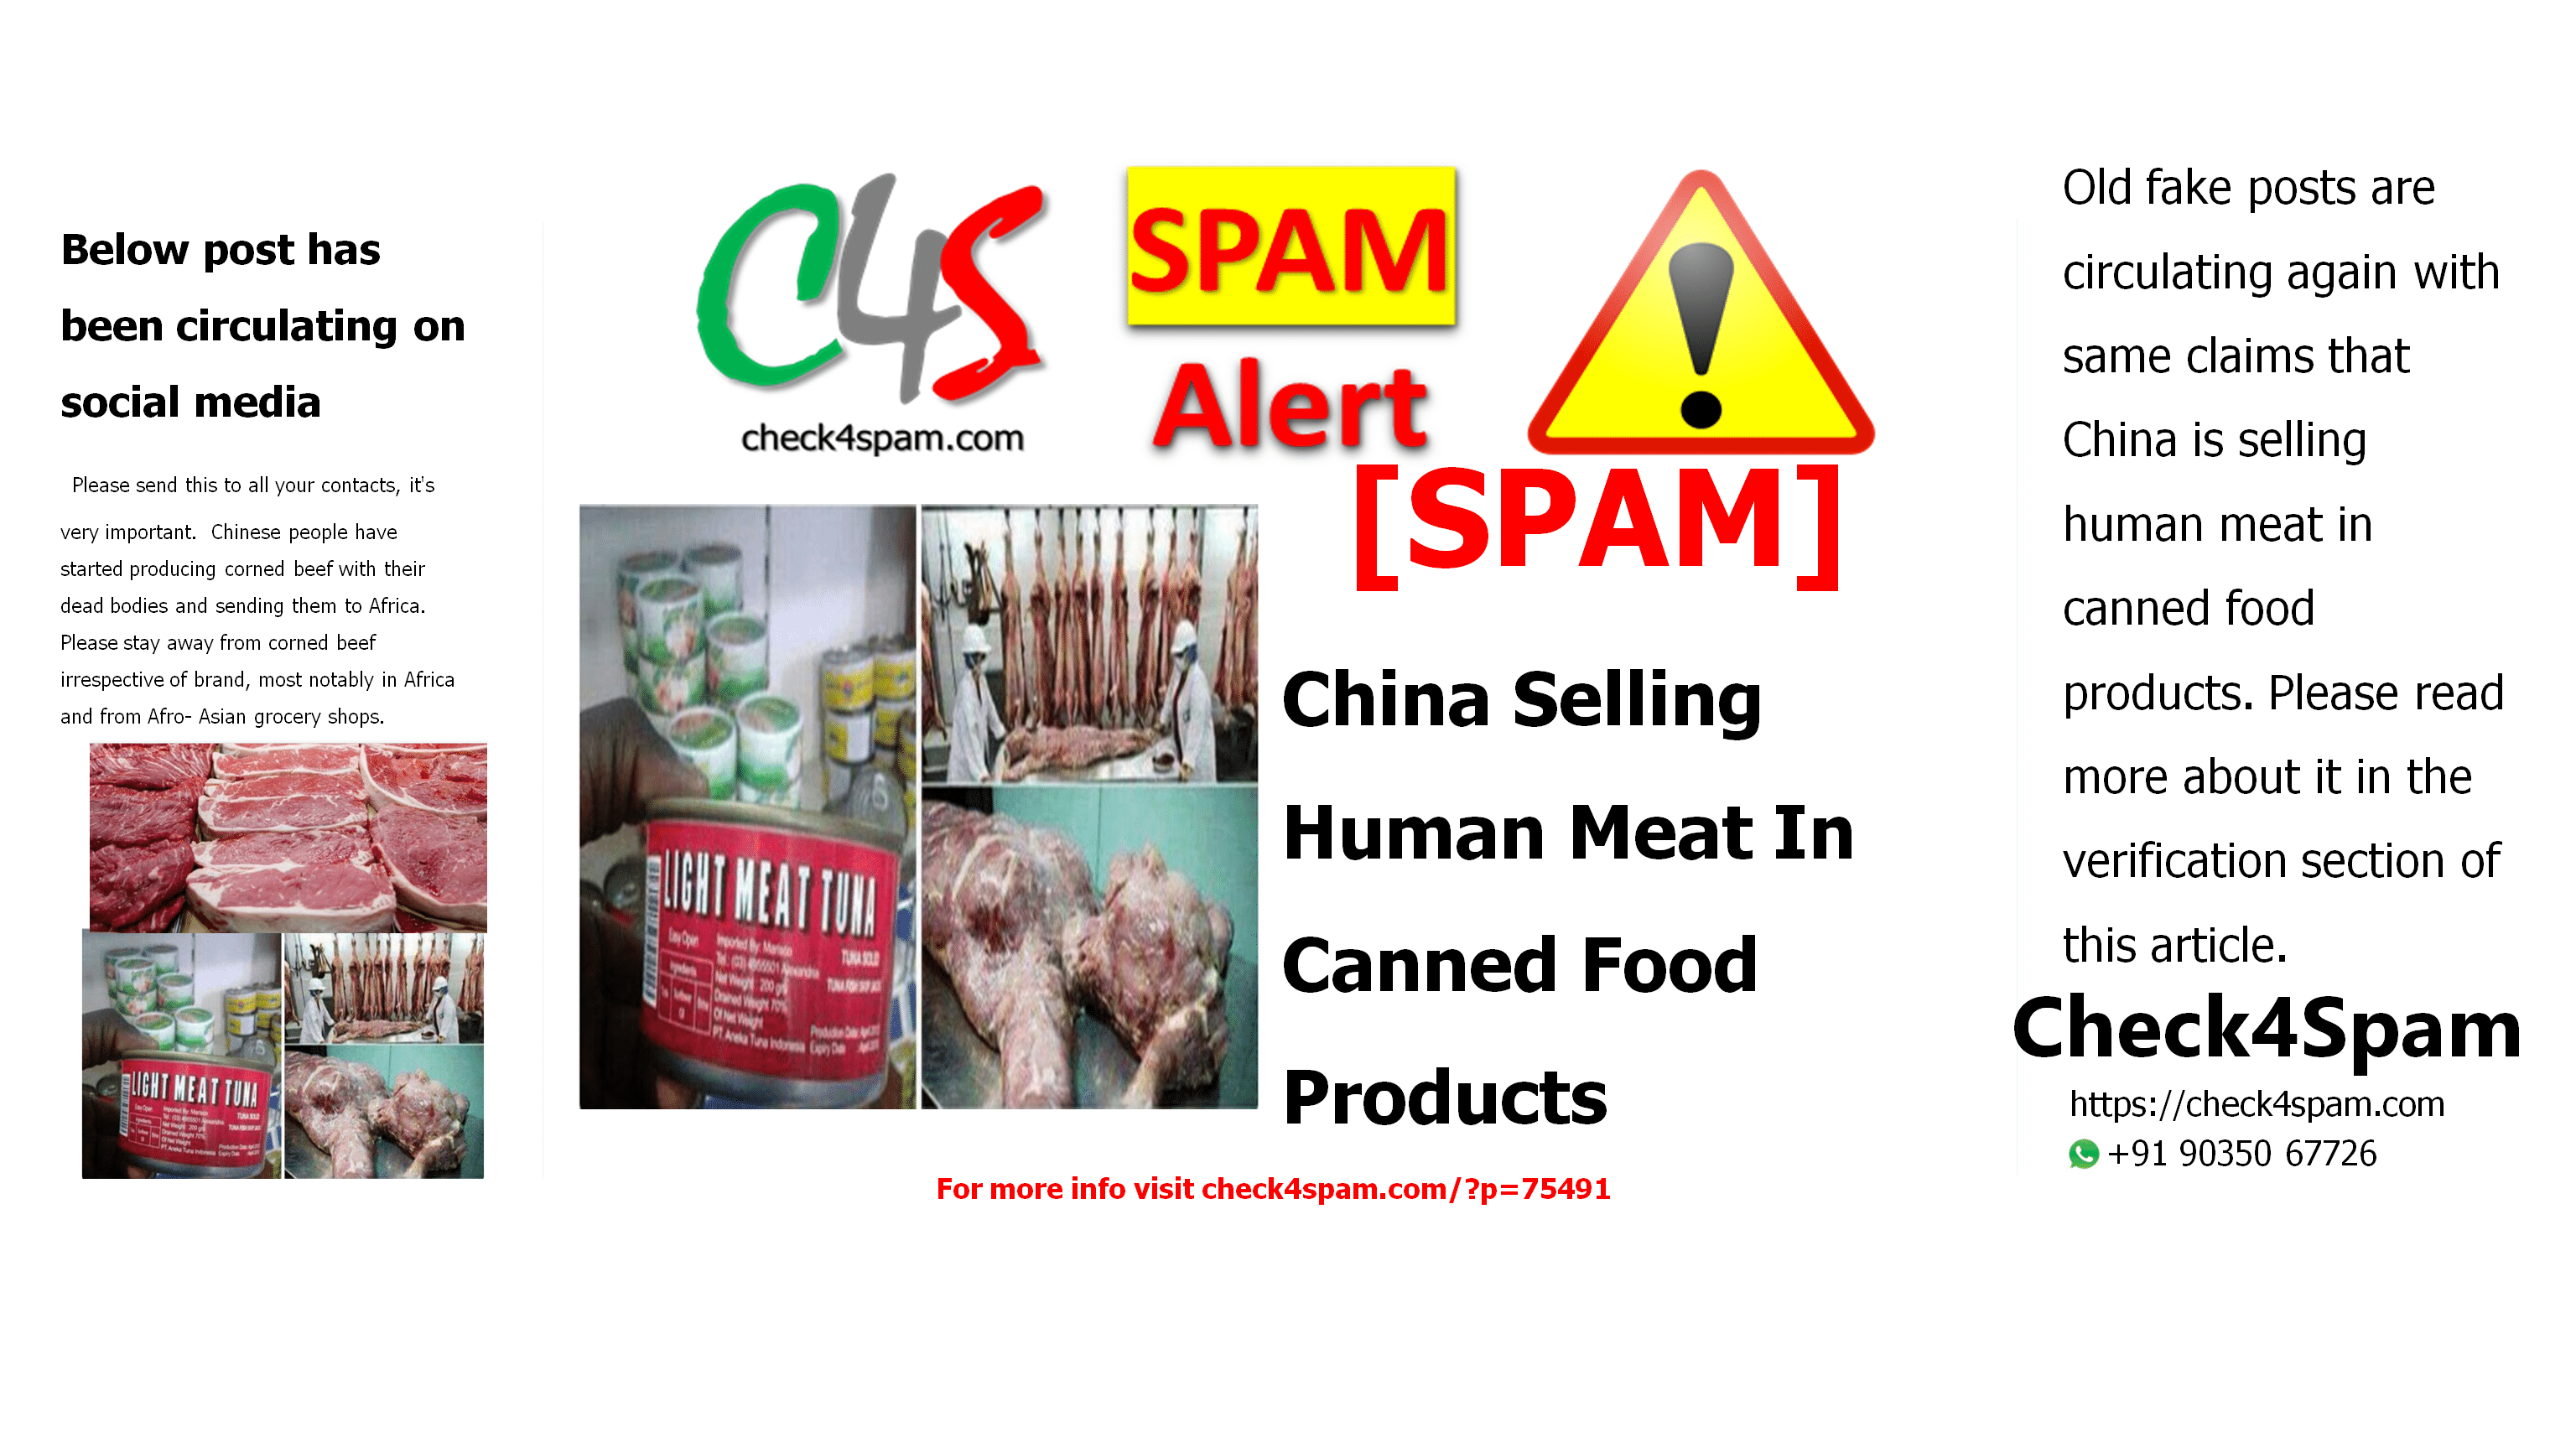 China Selling Human Meat In Canned Food Products